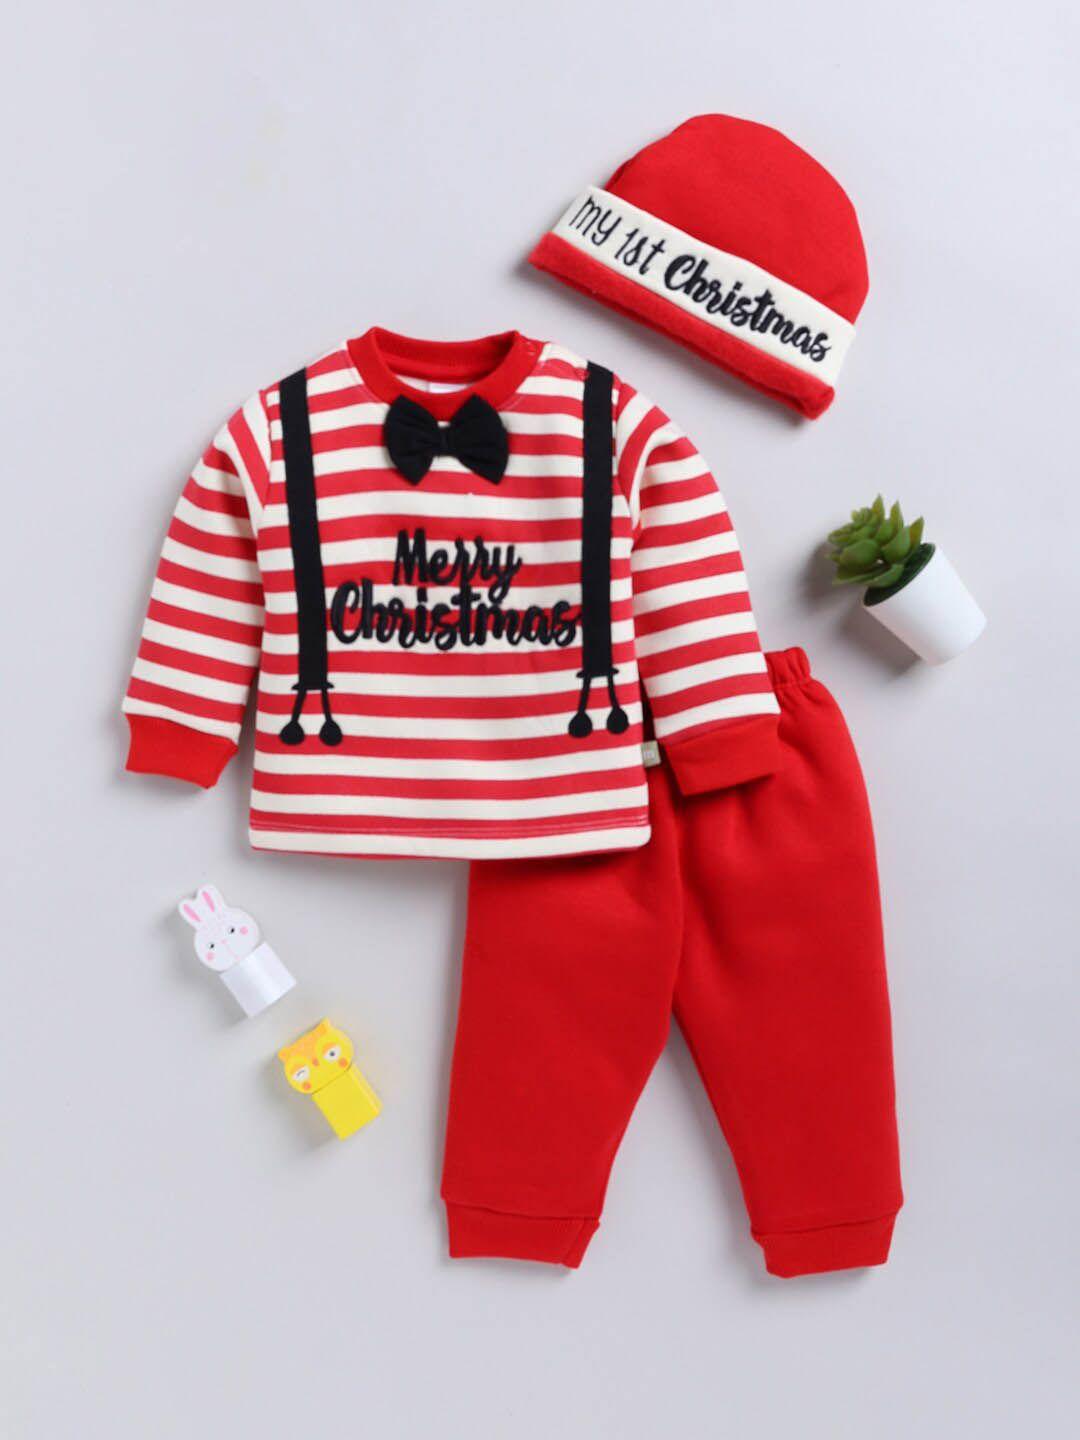 moms love infant kids hooded t shirt with trousers with bow